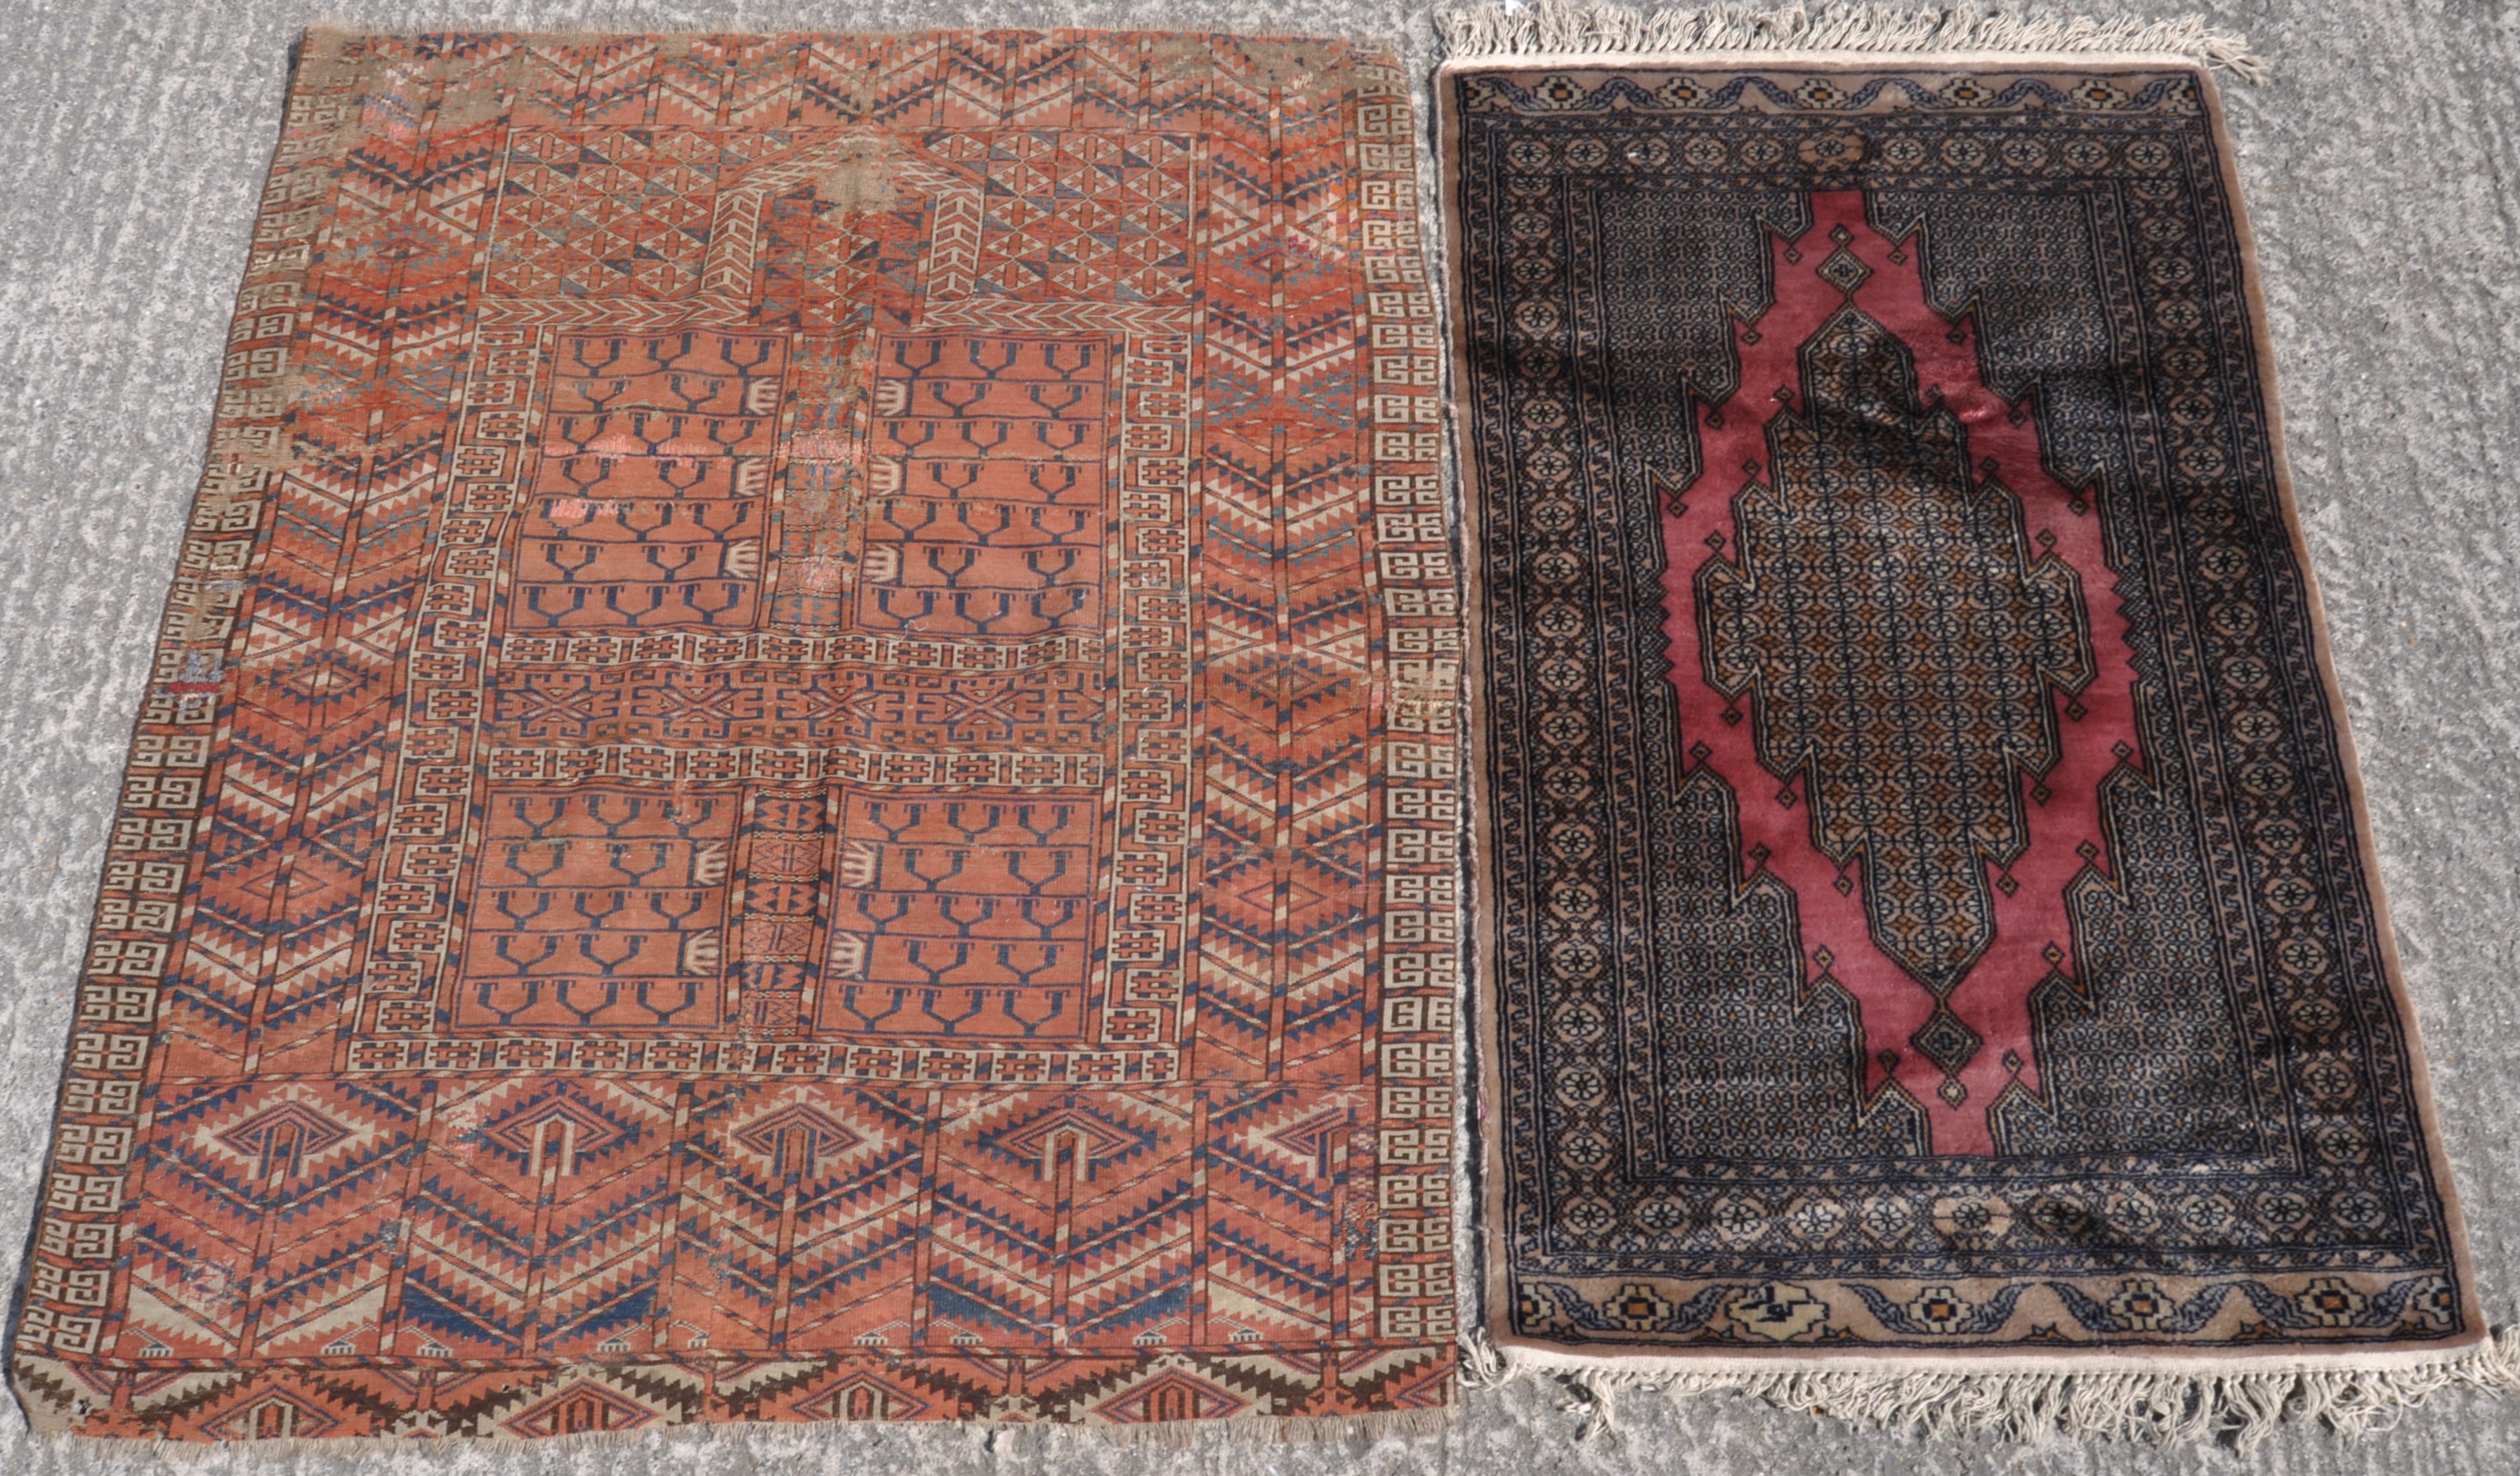 Two 20th century ground rugs, one with a cream and navy border and central motif on a red ground,